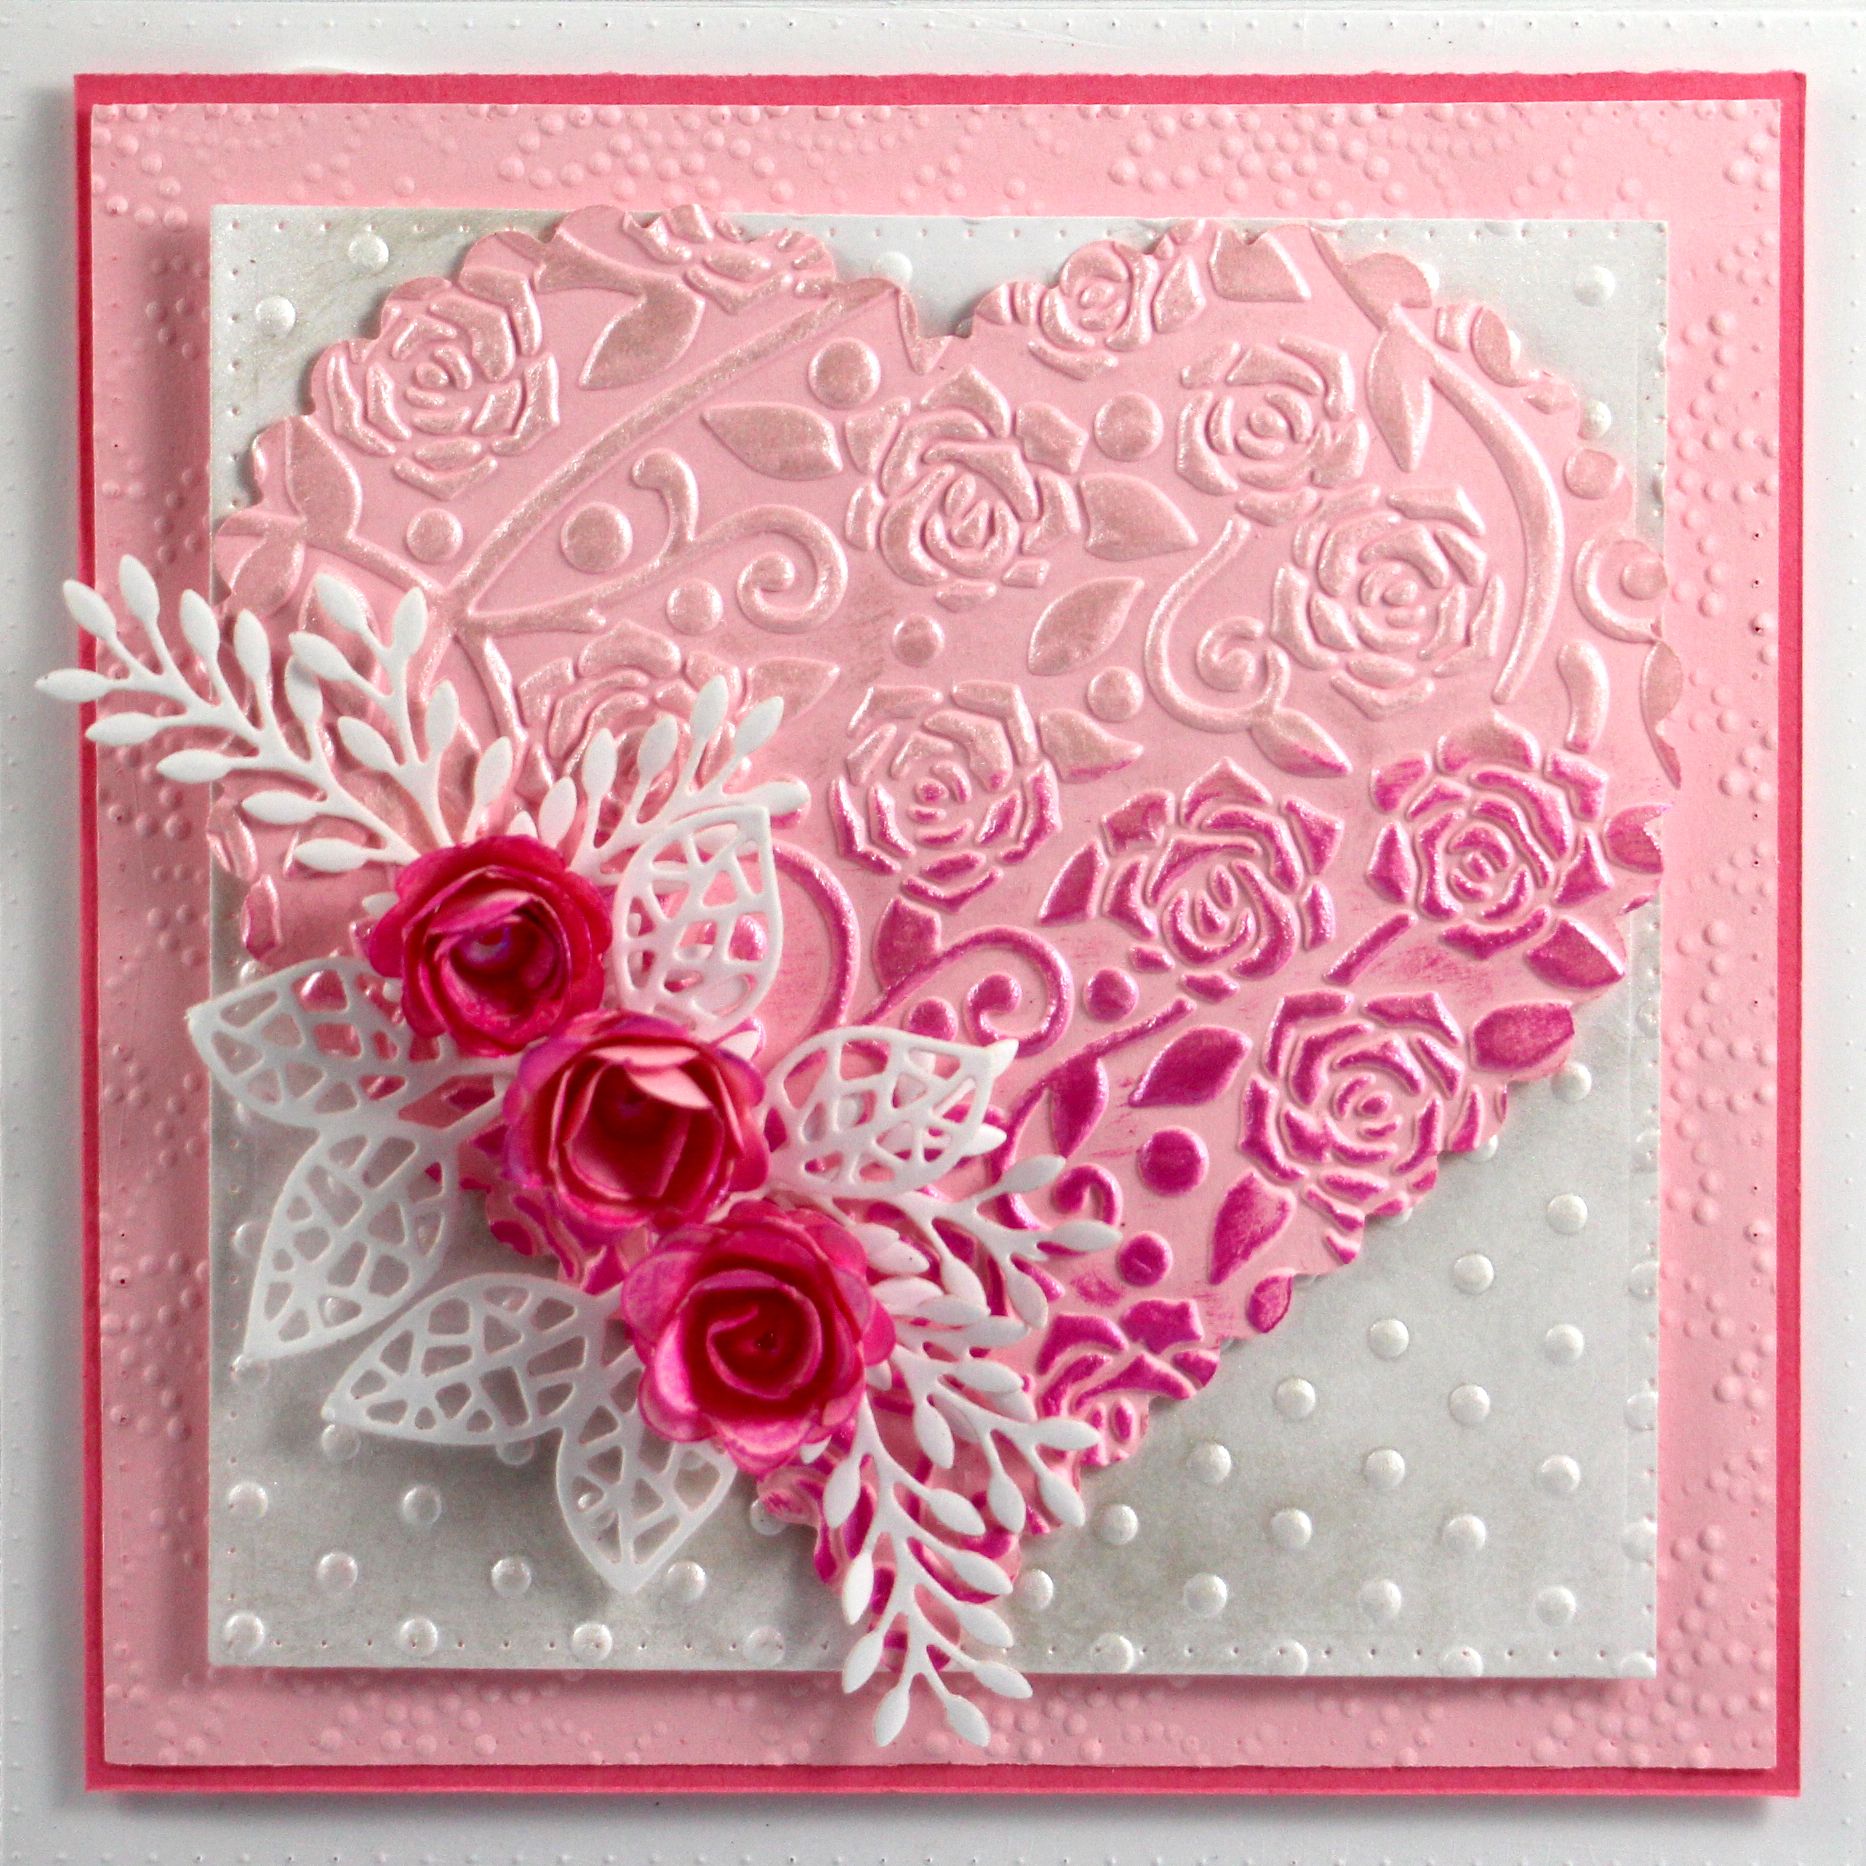 Cotton Candy Card Project